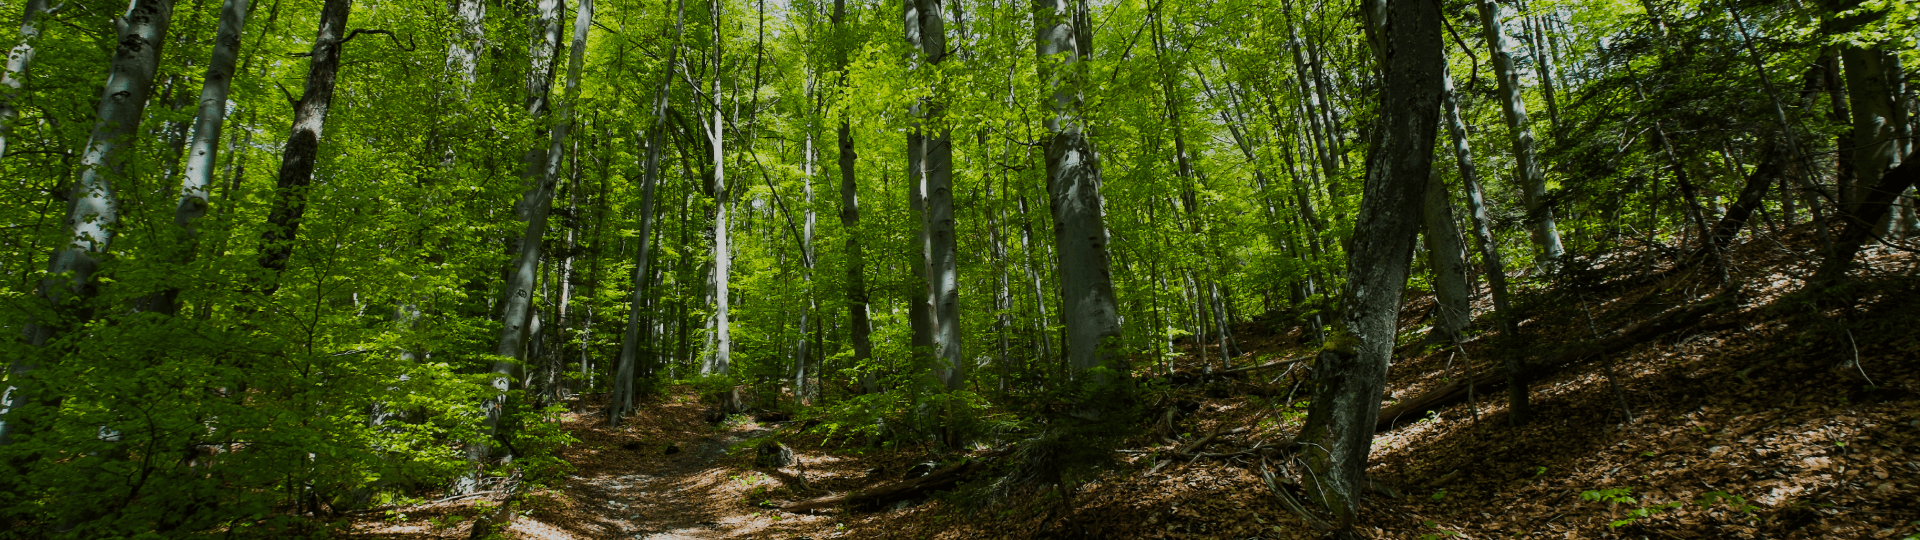 Fibre Excellence enviroFORESTERIE, a sustainable forest management